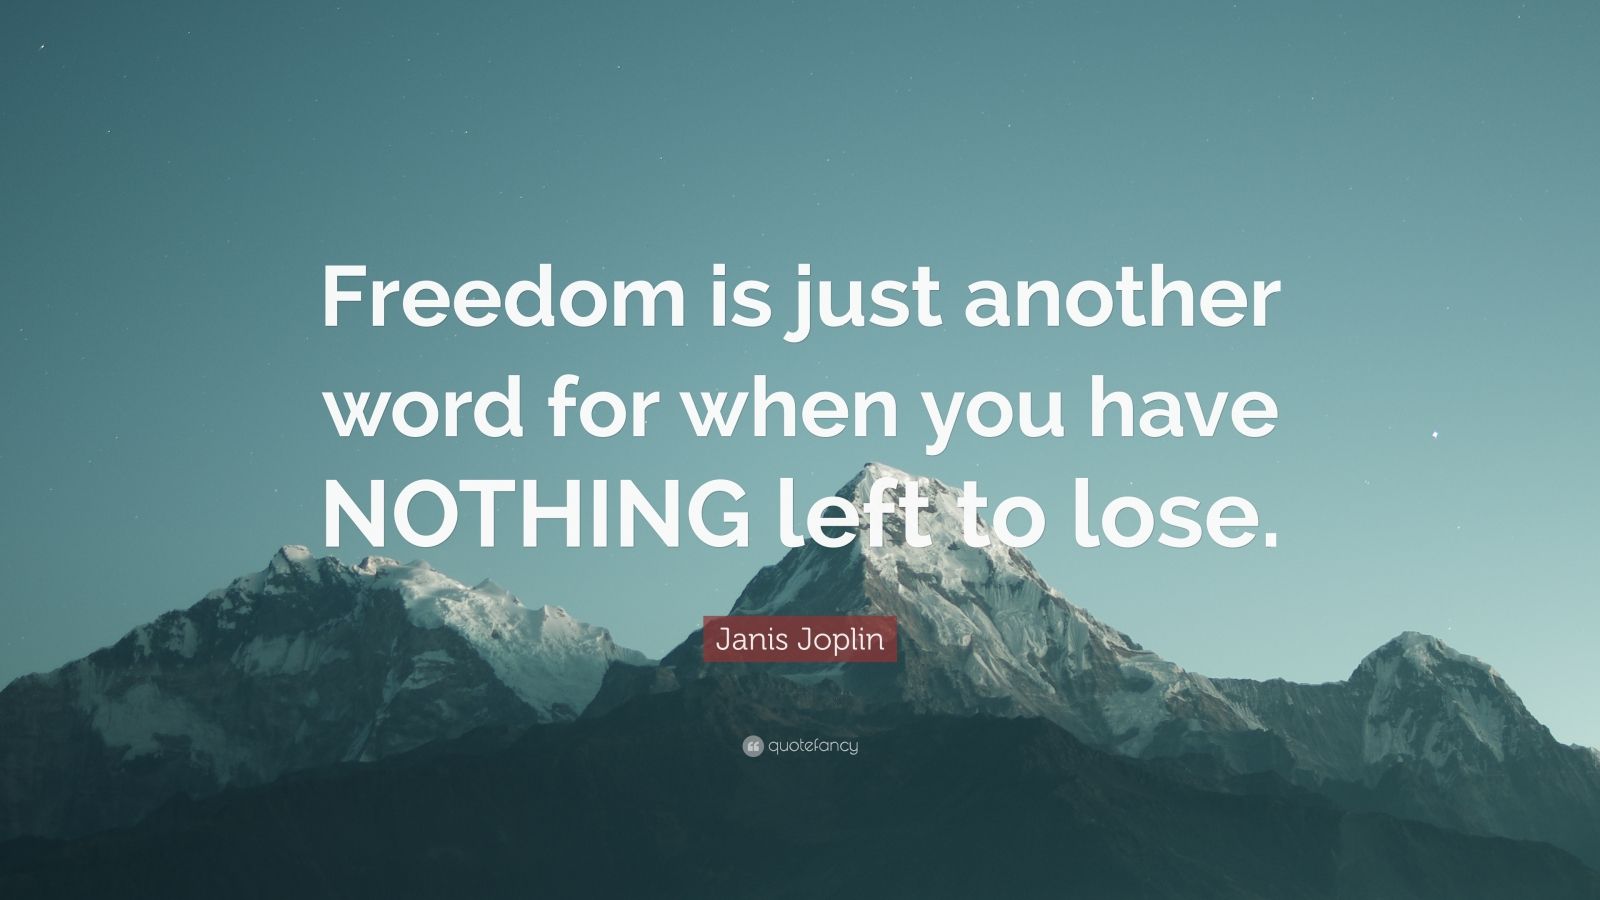 Janis Joplin Quote: “Freedom is just another word for when you have ...